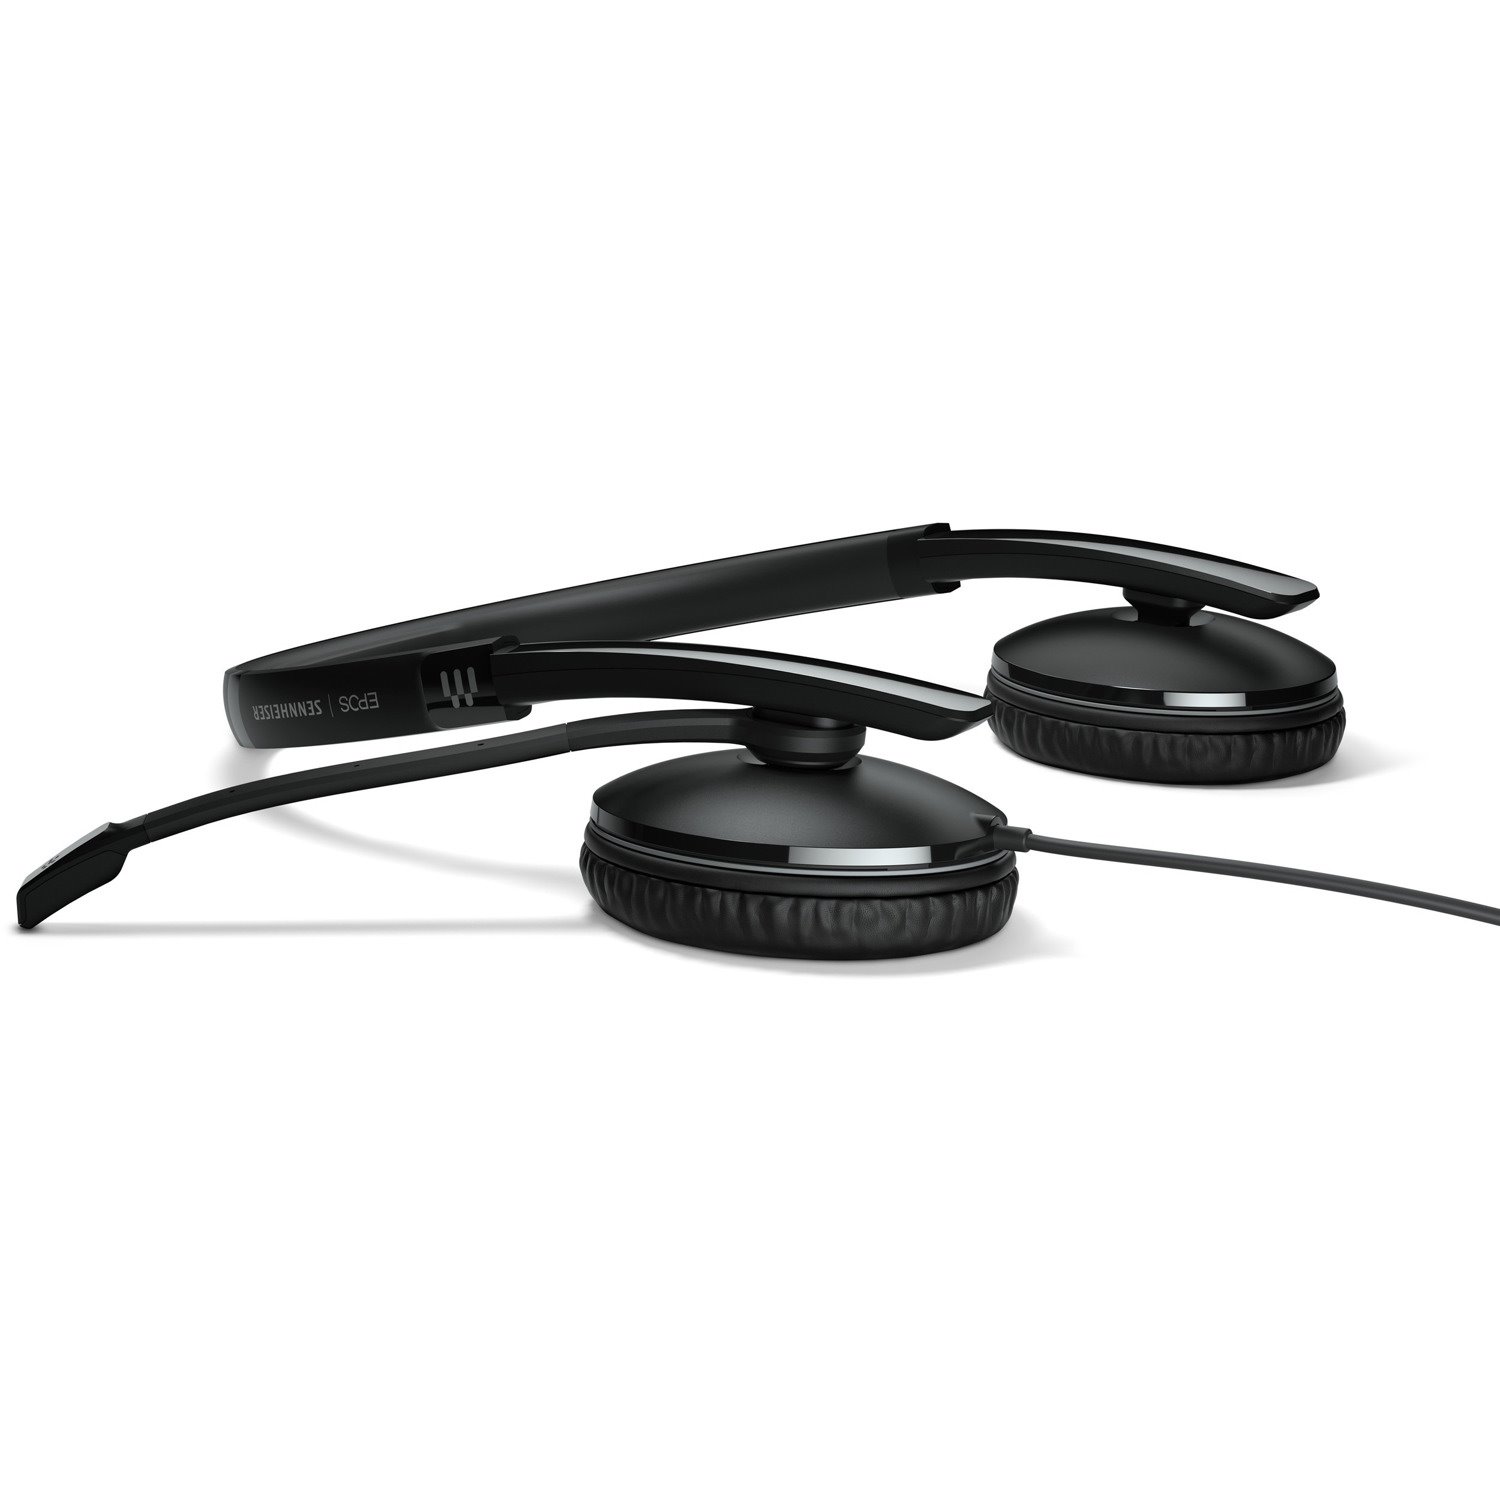 EPOS ADAPT ADAPT 160T ANC USB-C Wired On-ear Stereo Headset